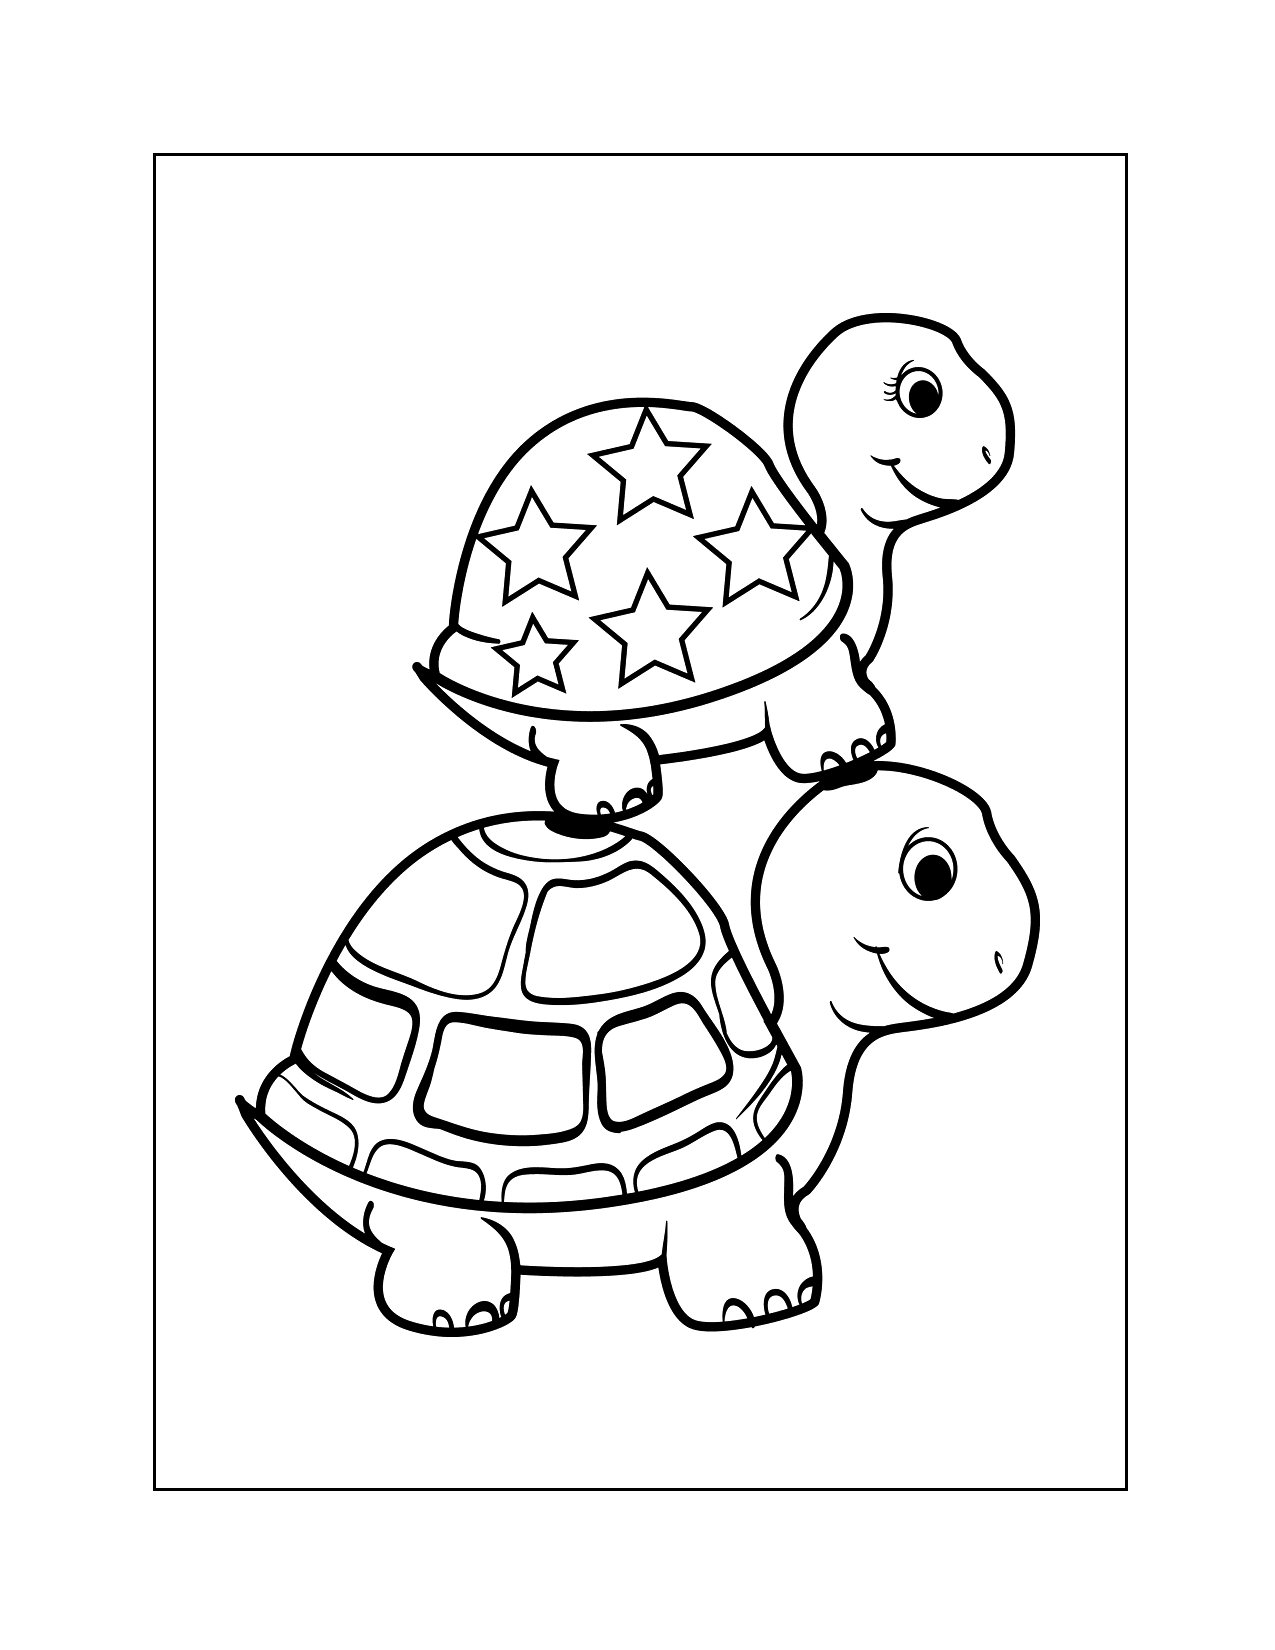 Two Turtle Pyramid Coloring Page